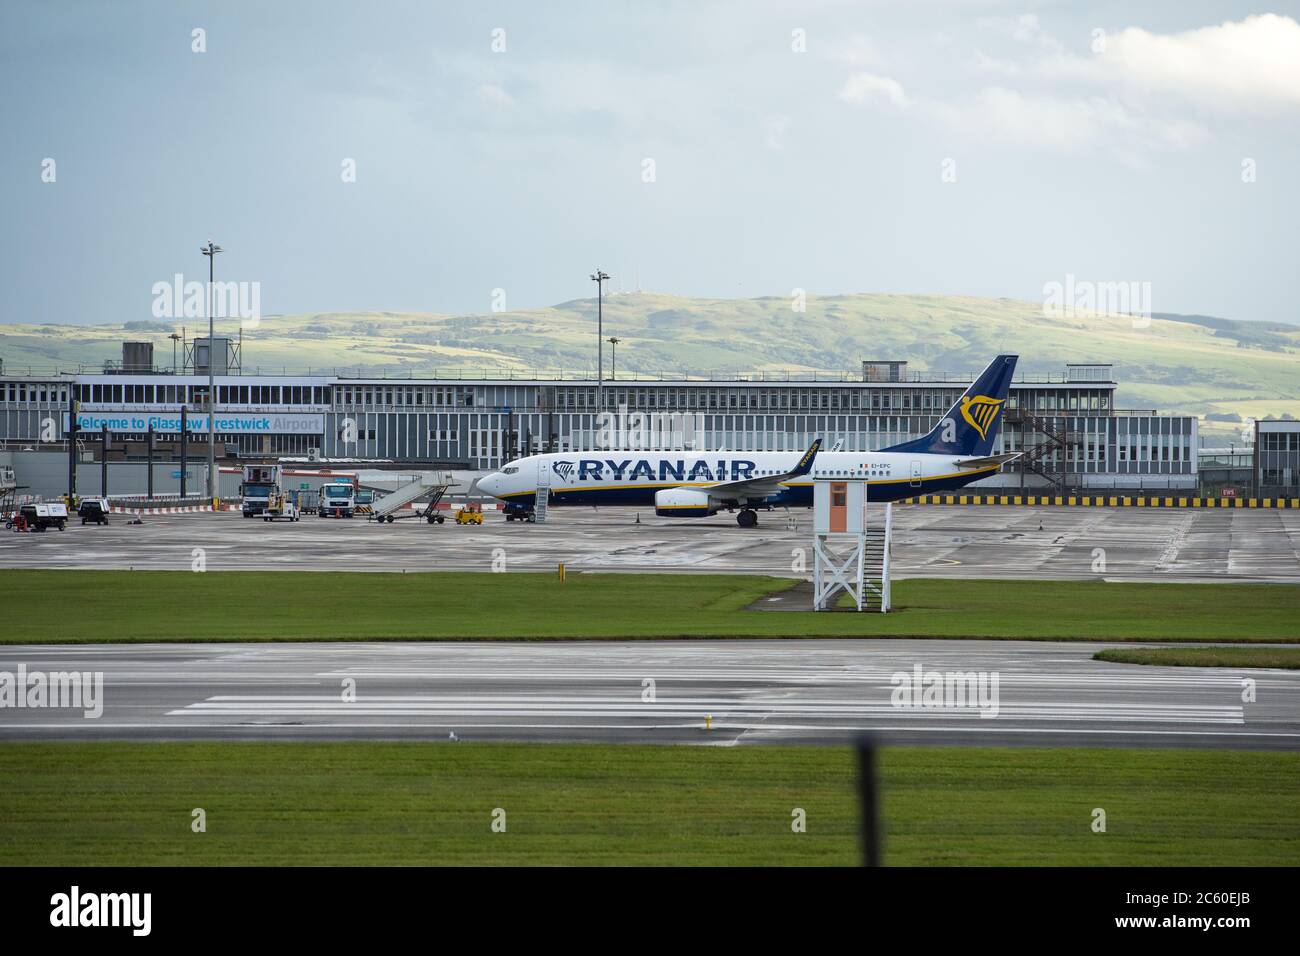 Prestwick, Scotland, UK. 5 July 2020. Ryanair which is one of Europe's largest low cost scheduled airlines, is to axe jobs due to the coronavirus (COVID19) pandemic which has affected the global aviation industry, forcing many airlines to either go bust or cut huge numbers of staff in order to survive. Credit: Colin Fisher/Alamy Live News. Stock Photo